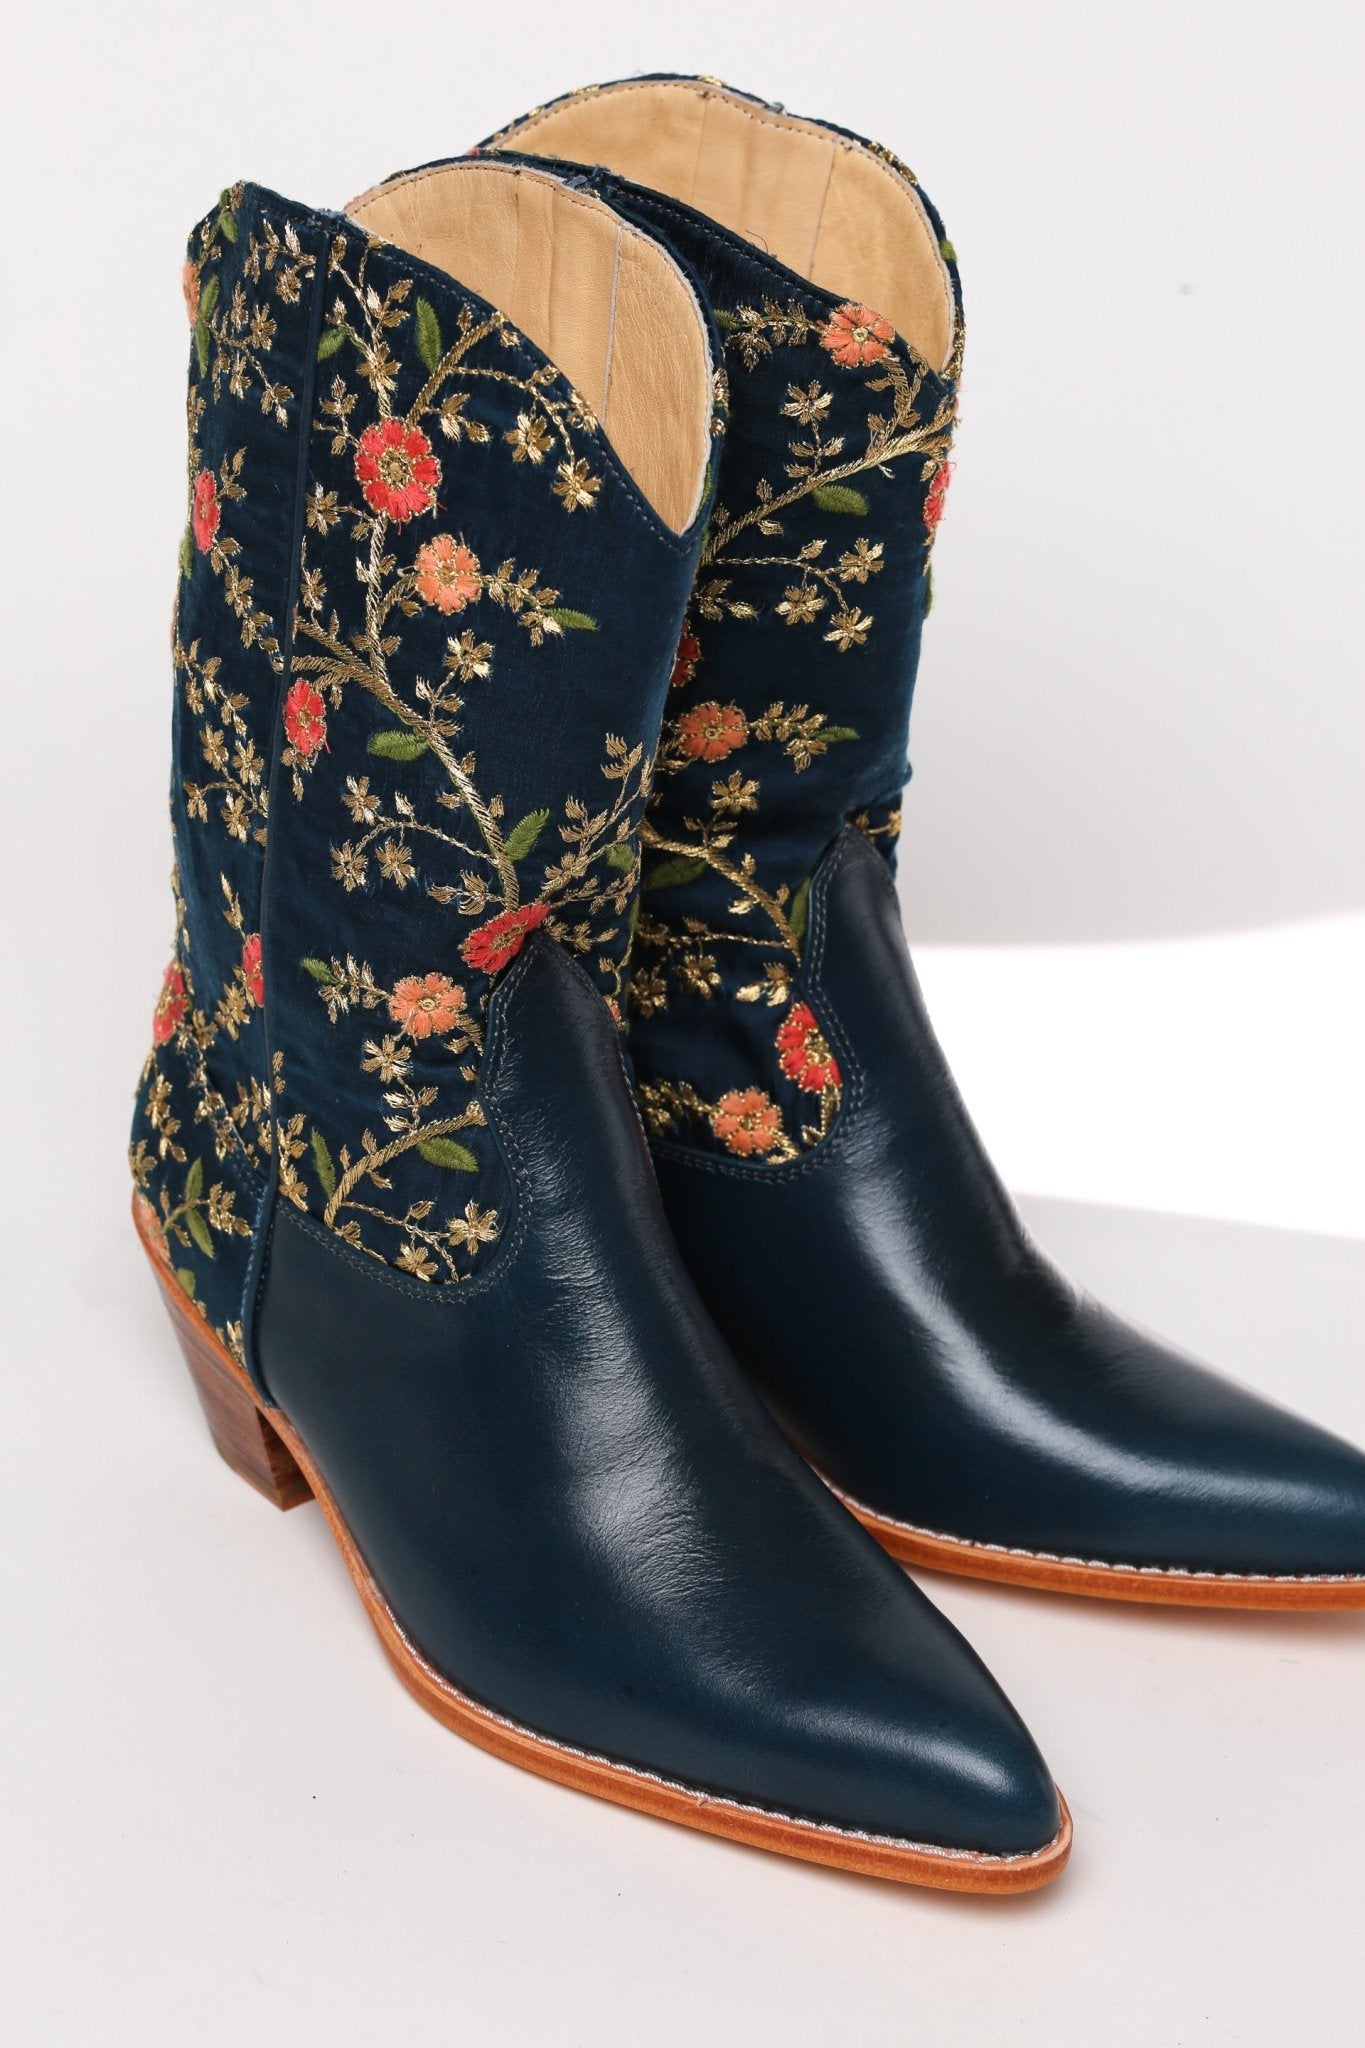 TURQUOISE LEATHER EMBROIDERED SILK BOOTS SONIA